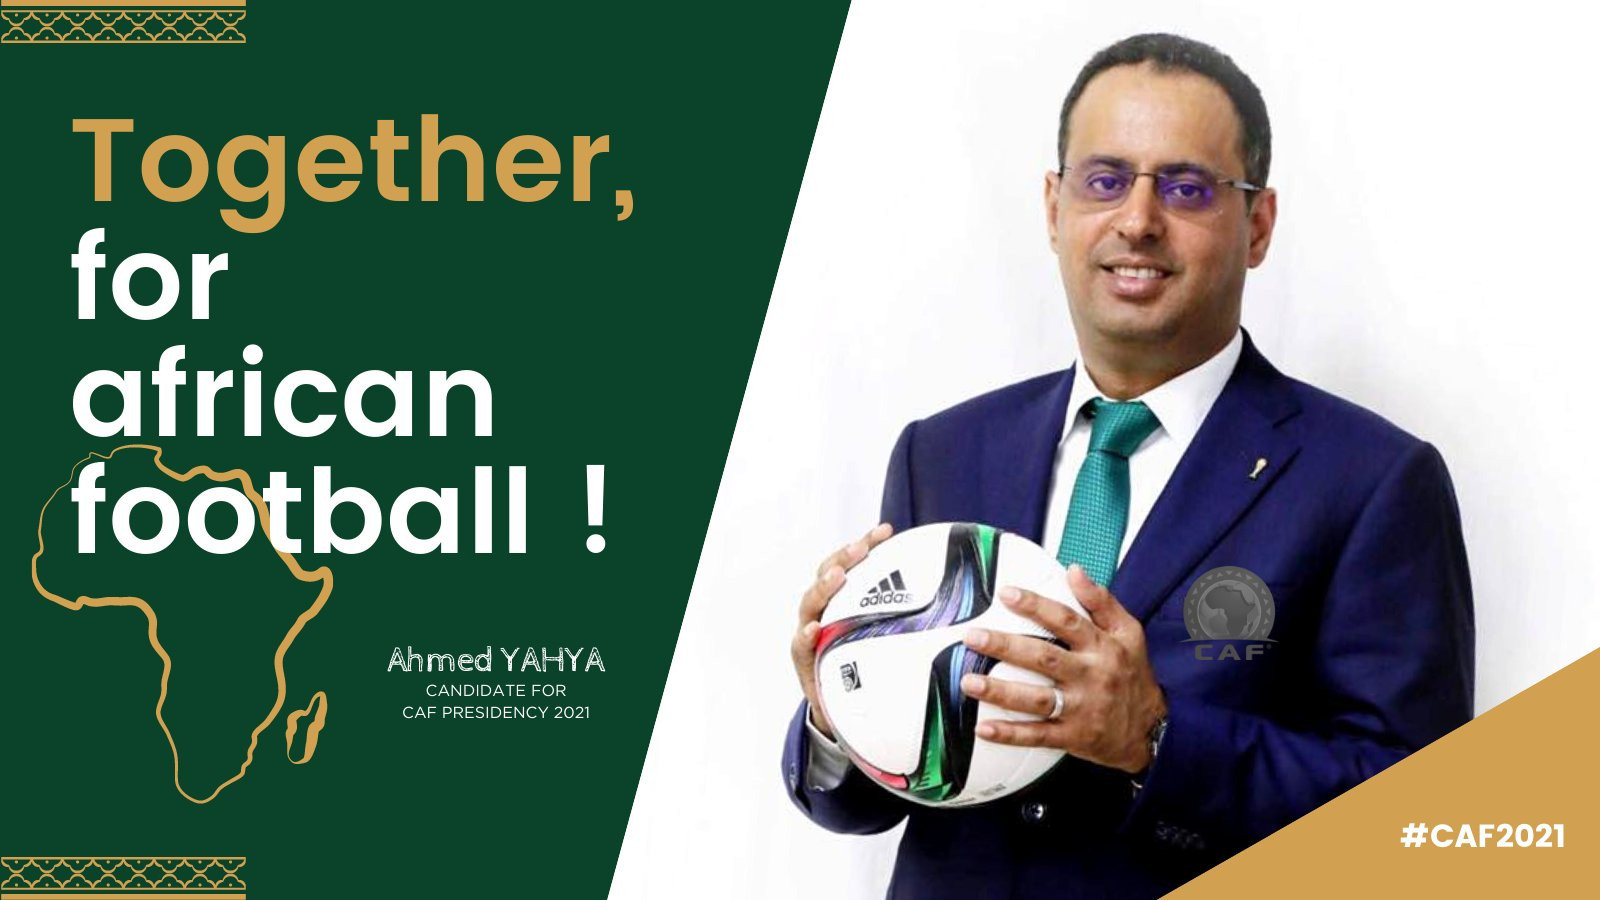 Ahmed Yahya has launched his candidacy for the CAF Presidency ©Getty Images